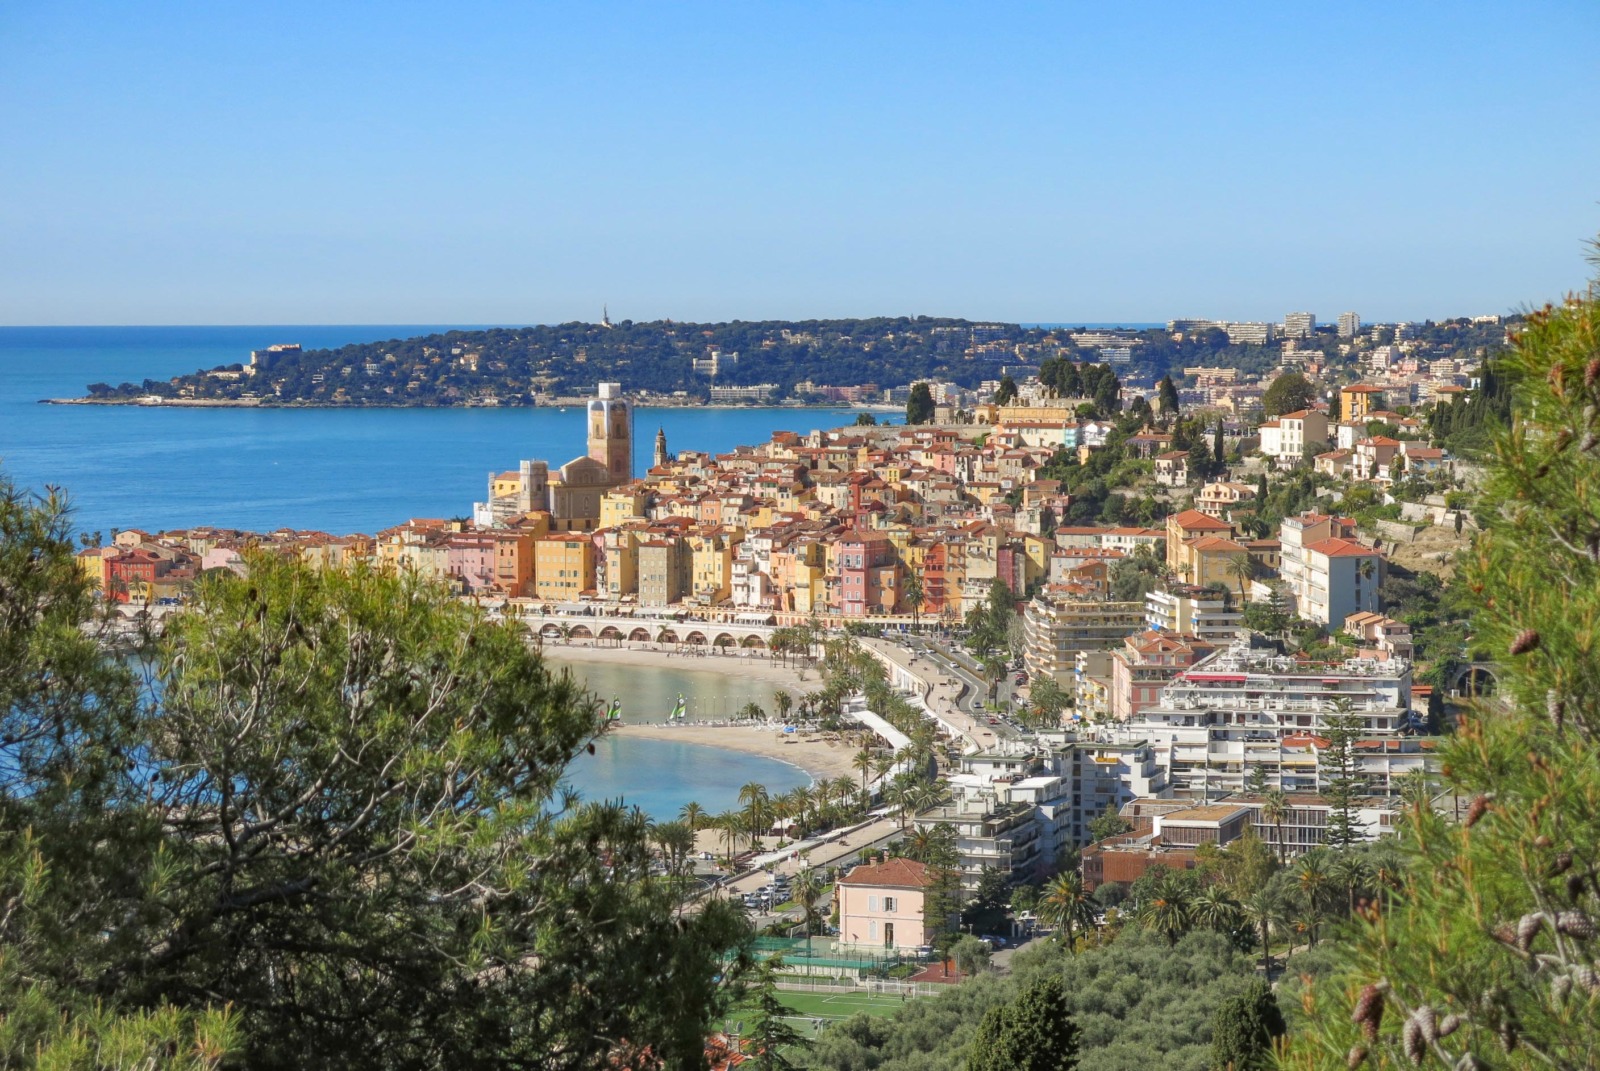 The old town of Menton from the Domaine des Colombières. Photo: Tangopaso (Public Domain)